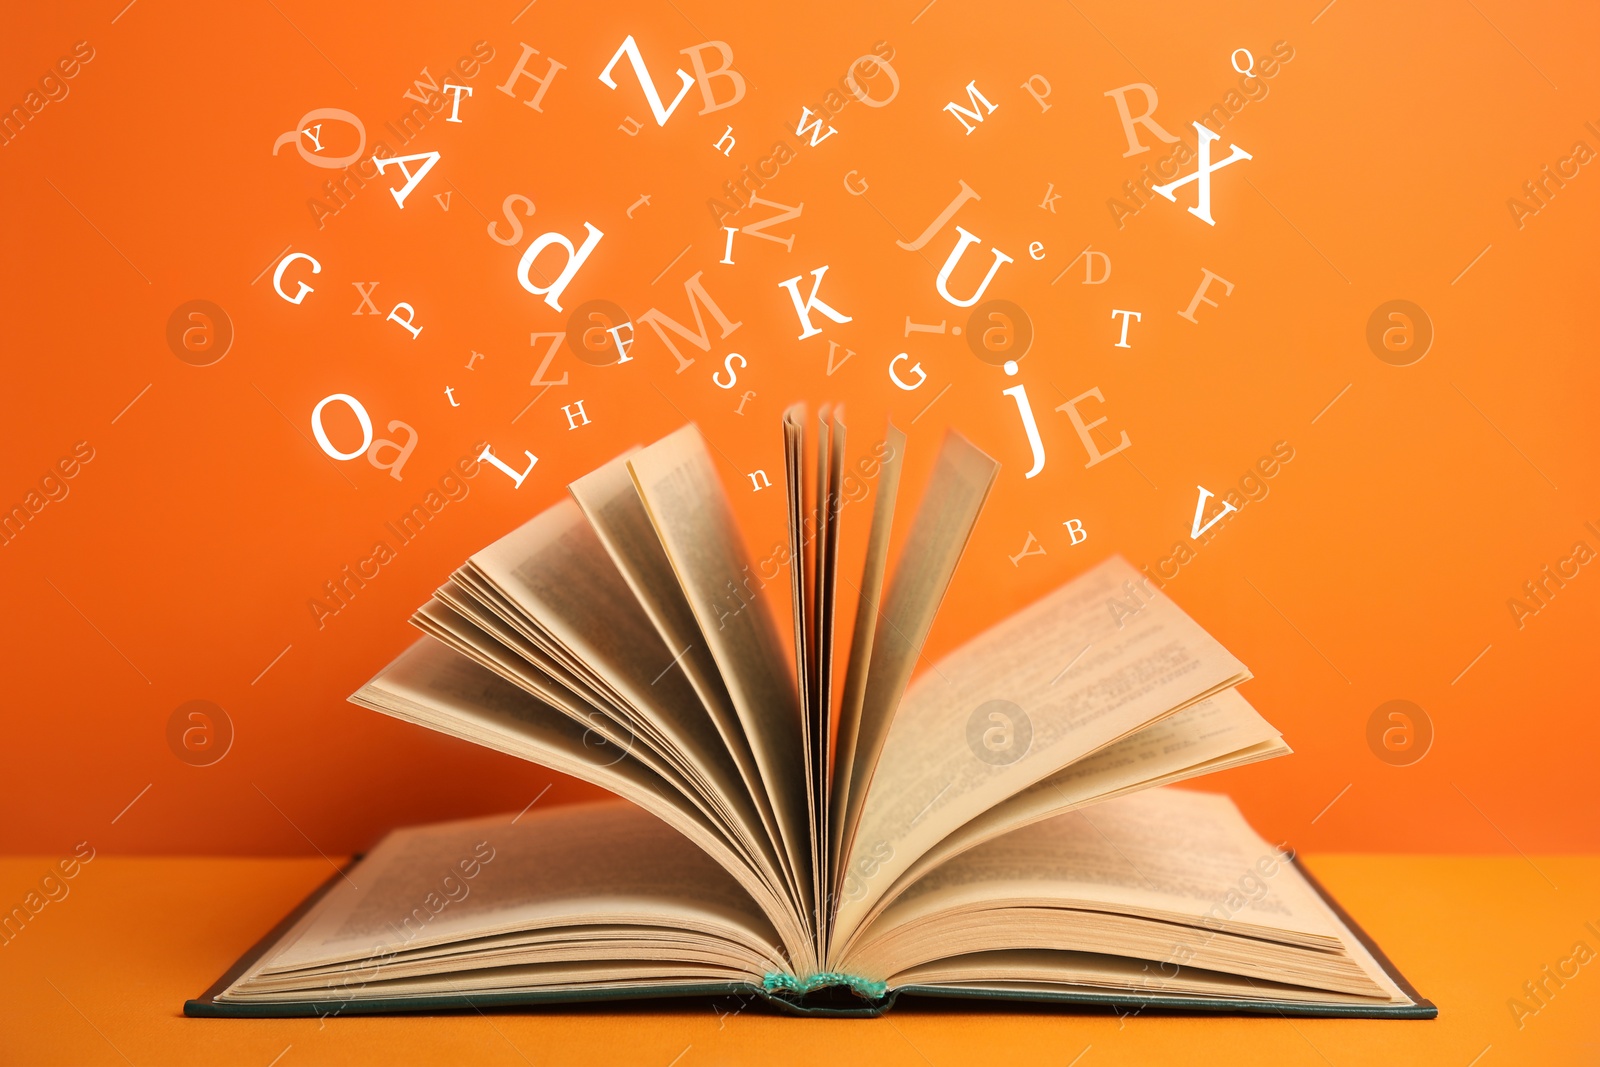 Image of Open book with letters flying out of it on orange background